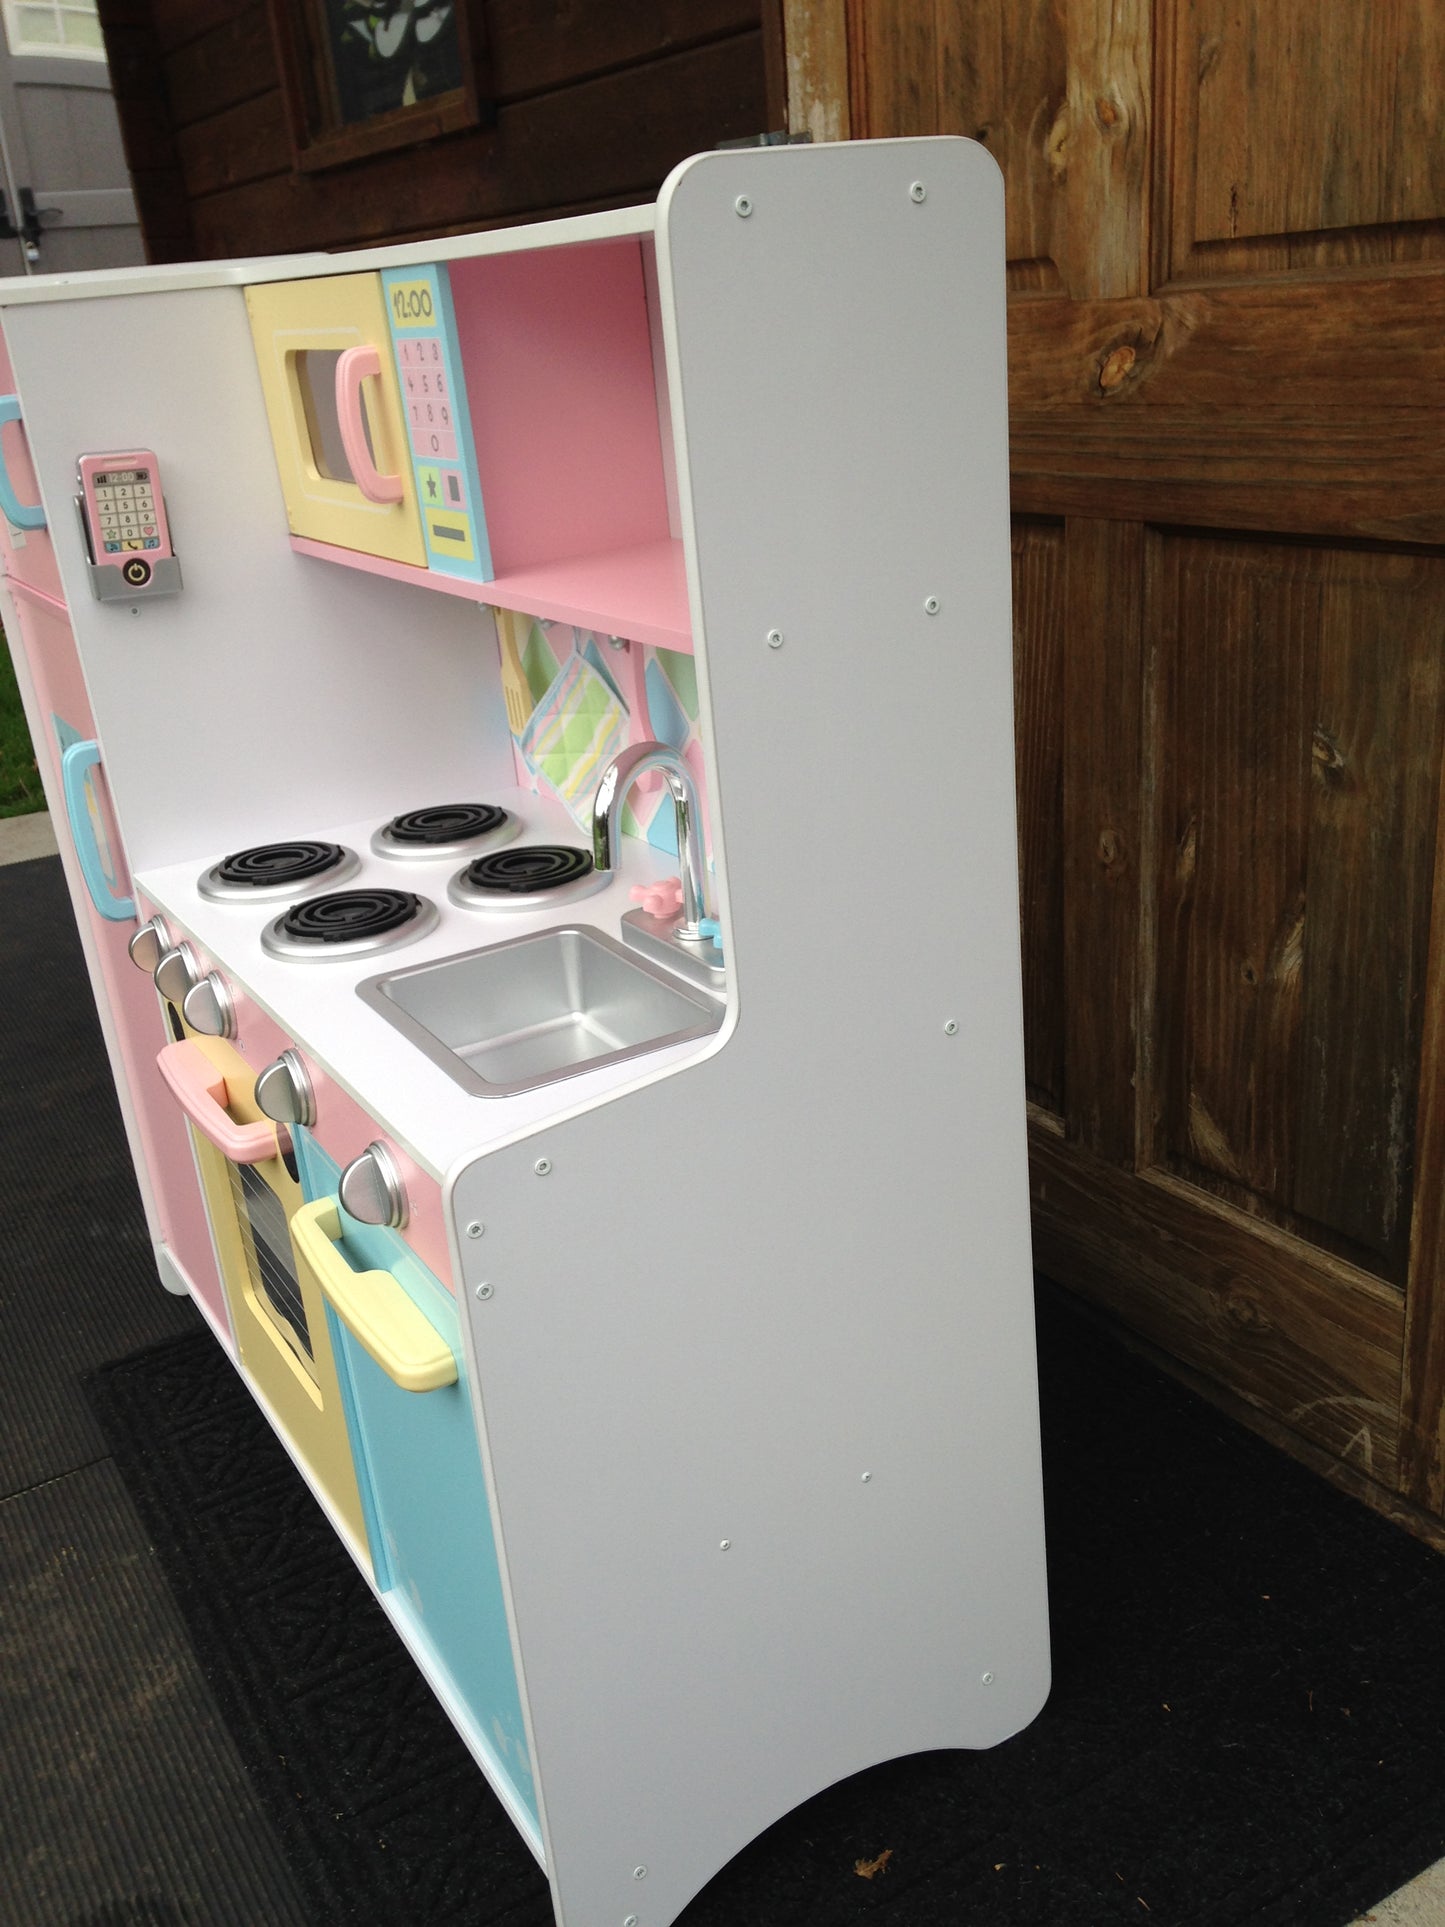 KidKraft Large Pastel Play Family Wood Kitchen 56x46x16 inch New Demo Model Mint Condition